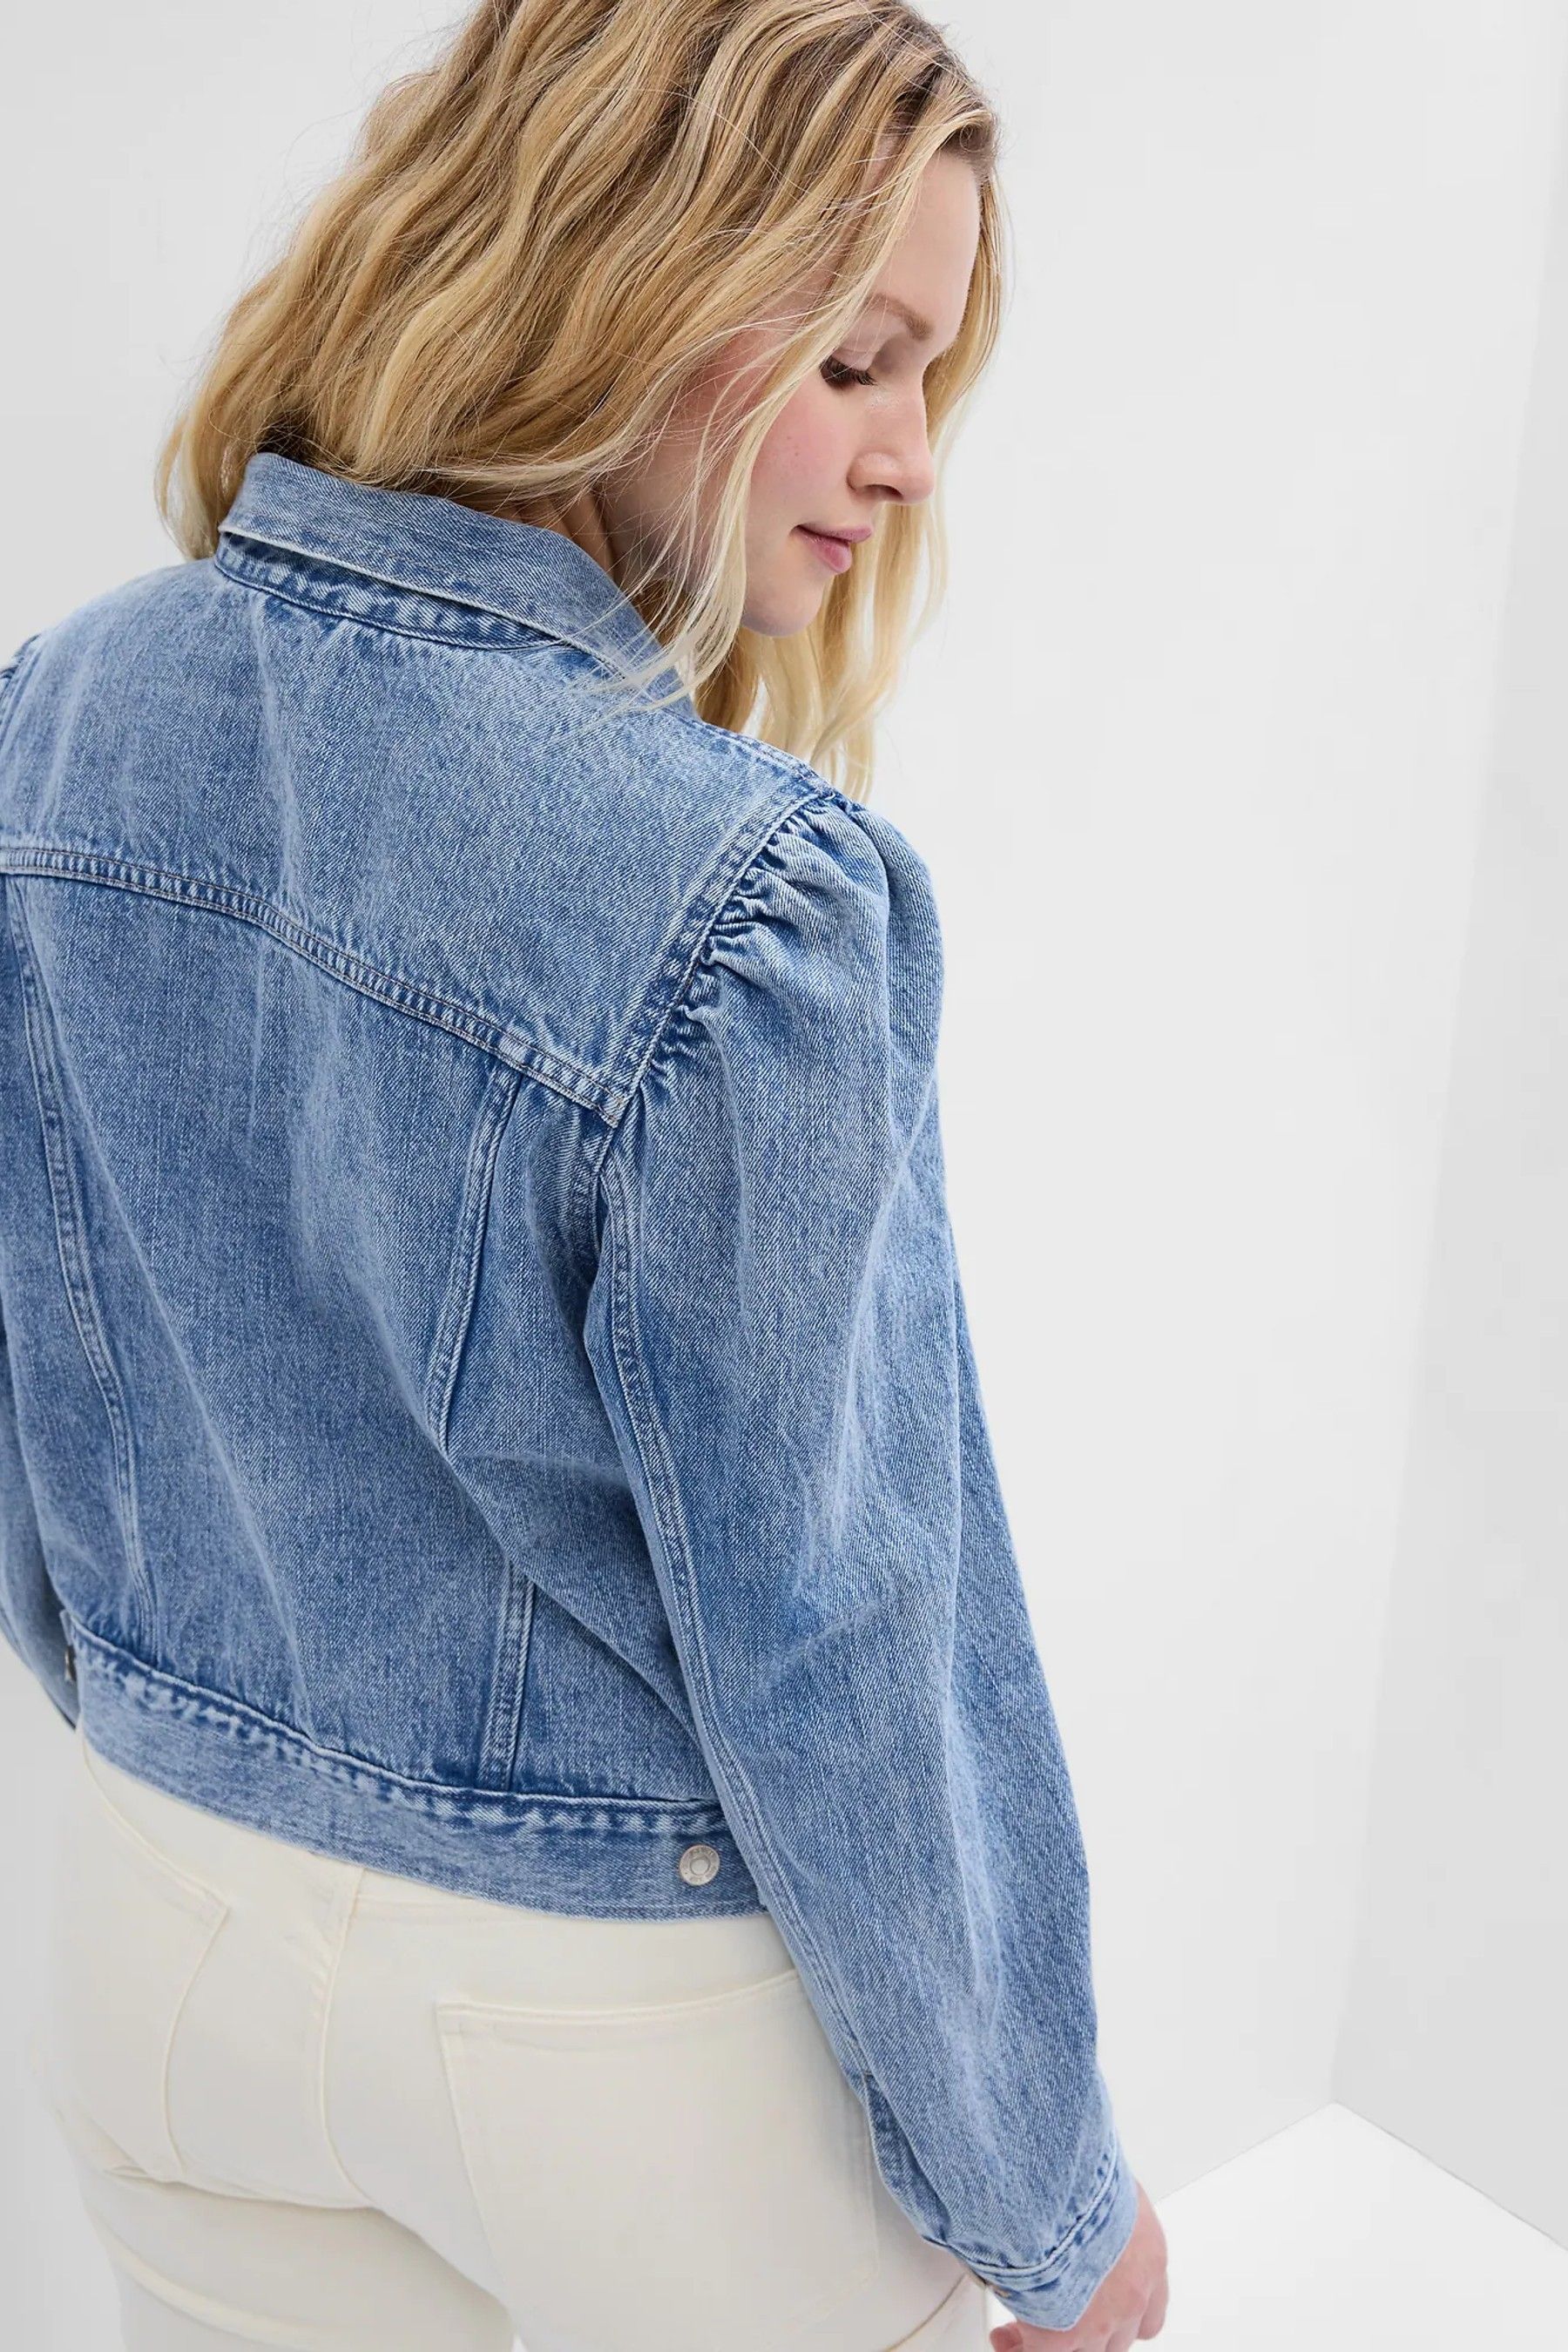 Buy Gap Puff Sleeve Icon Denim Jacket from the Gap online shop